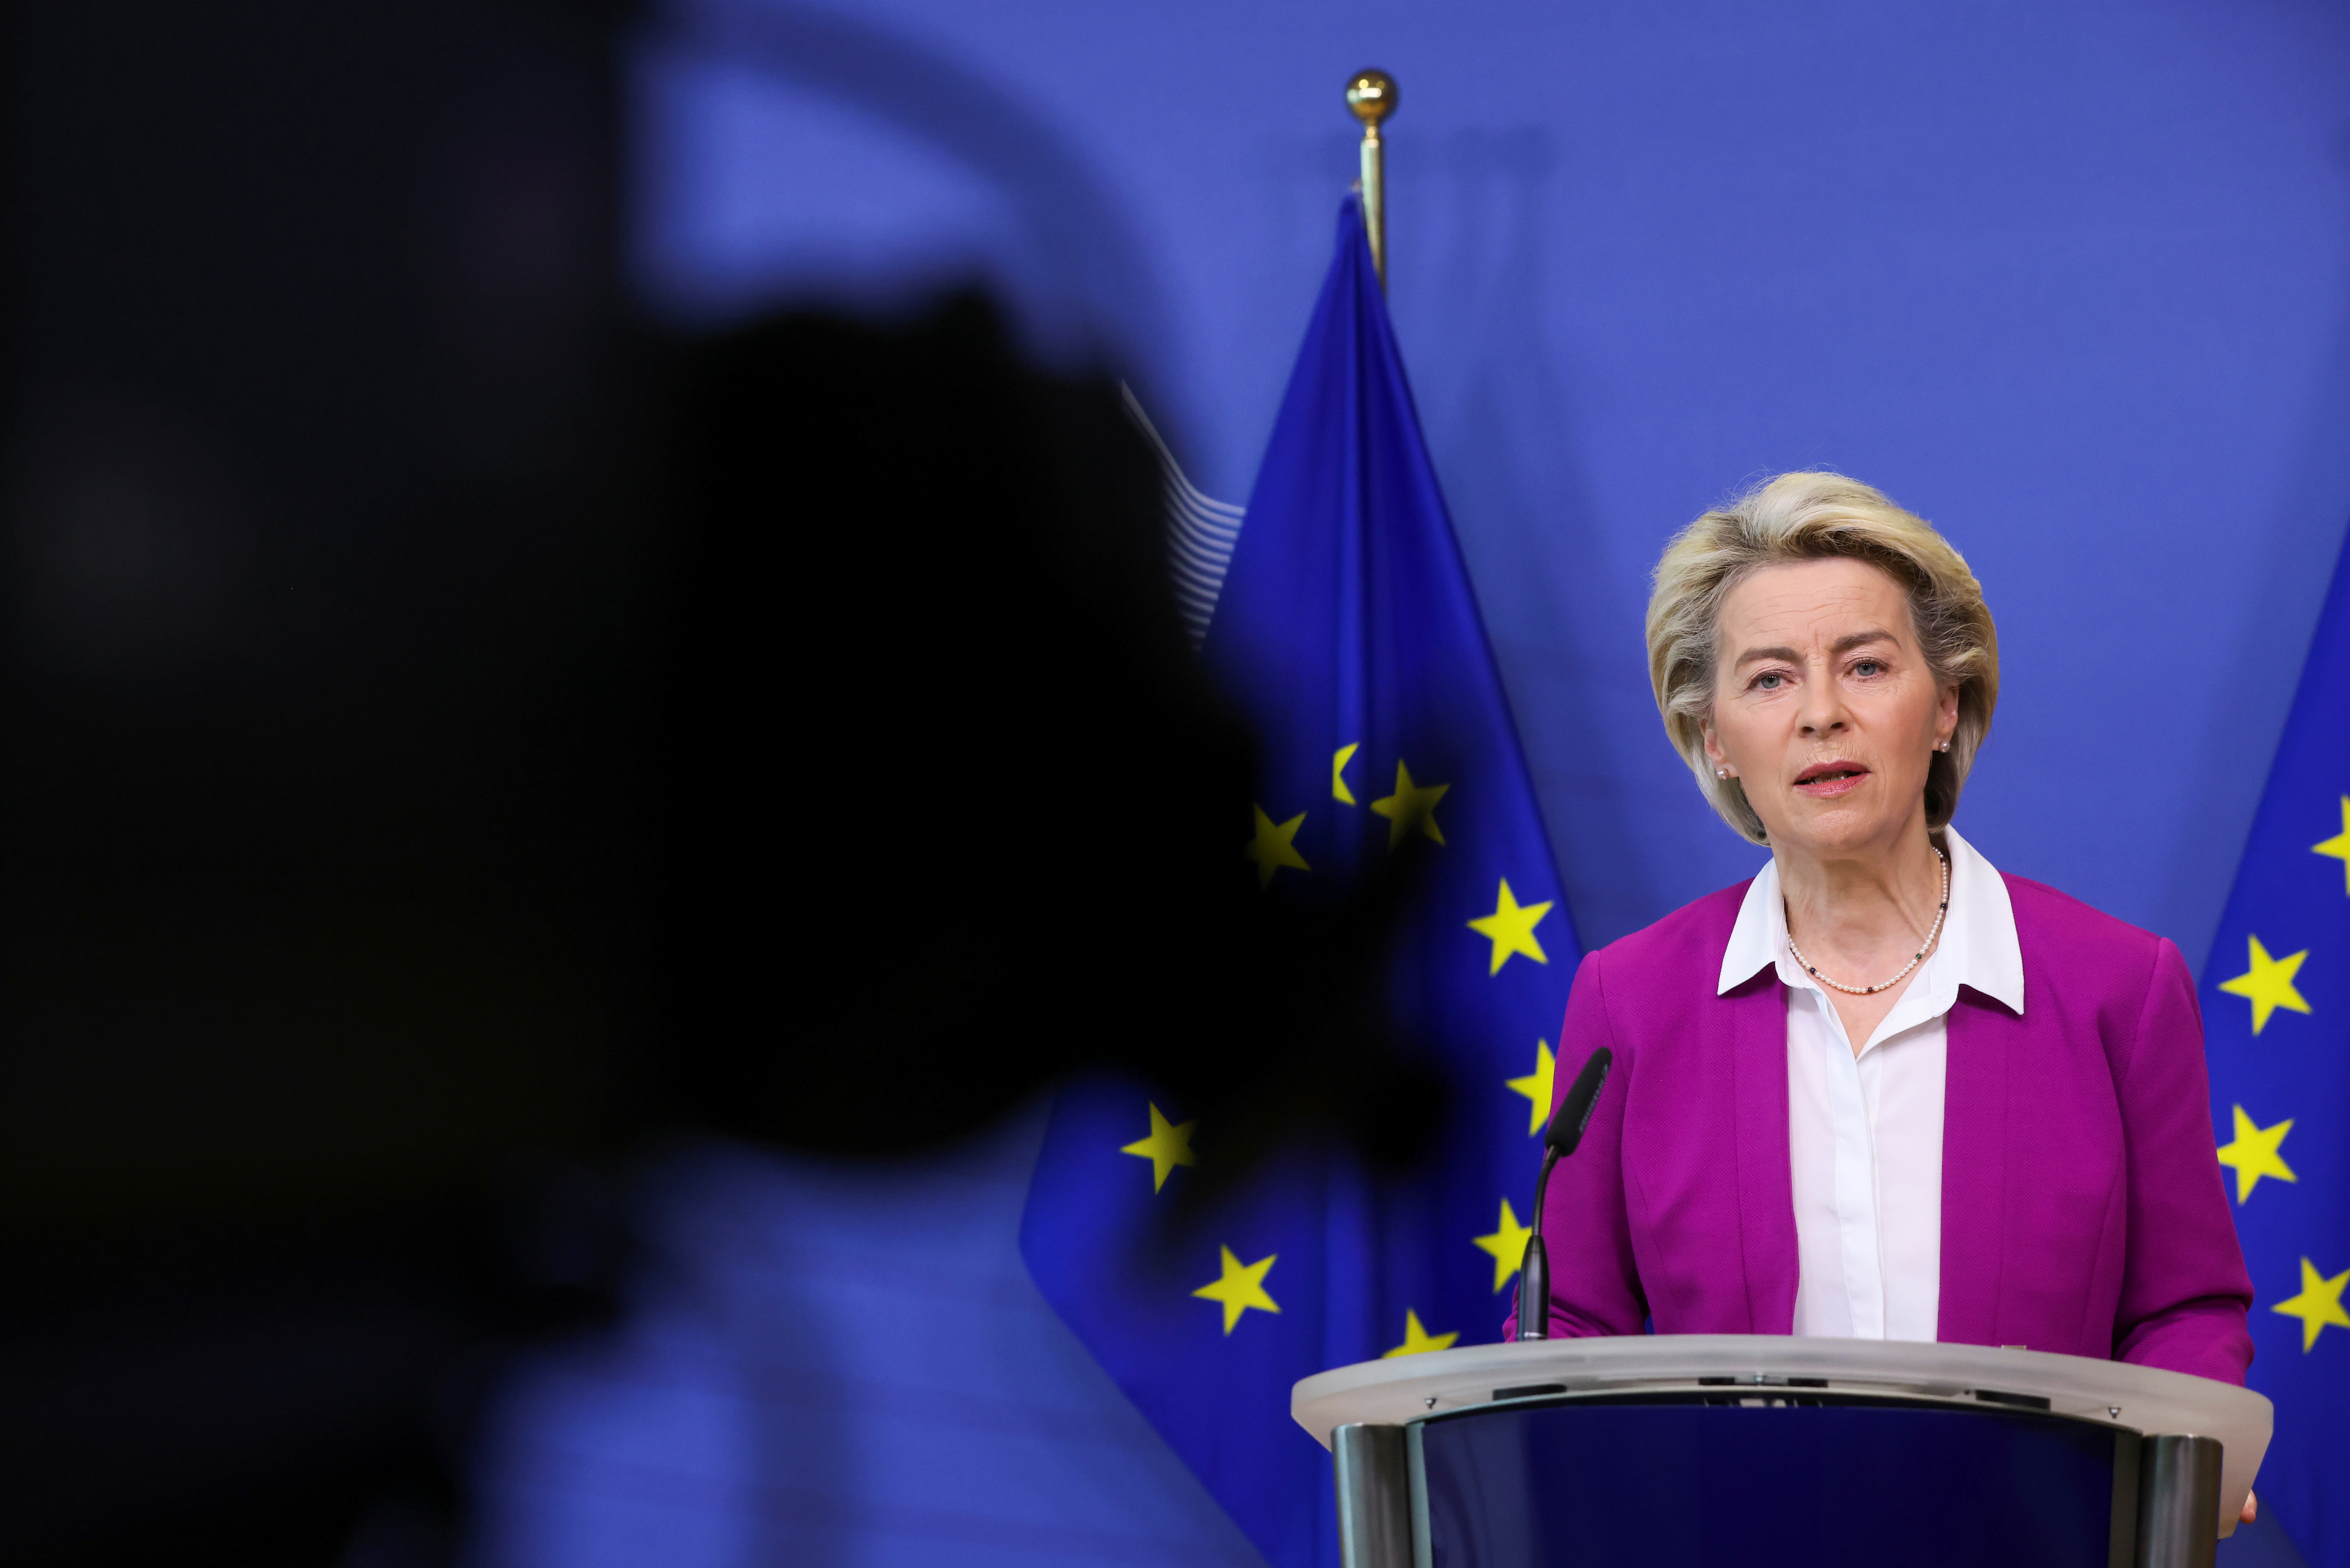 European Commission President Ursula von der Leyen gives a media statement on the coronavirus disease (COVID-19) vaccines, in Brussels, Belgium October 18, 2021.  REUTERS/Yves Herman/Pool